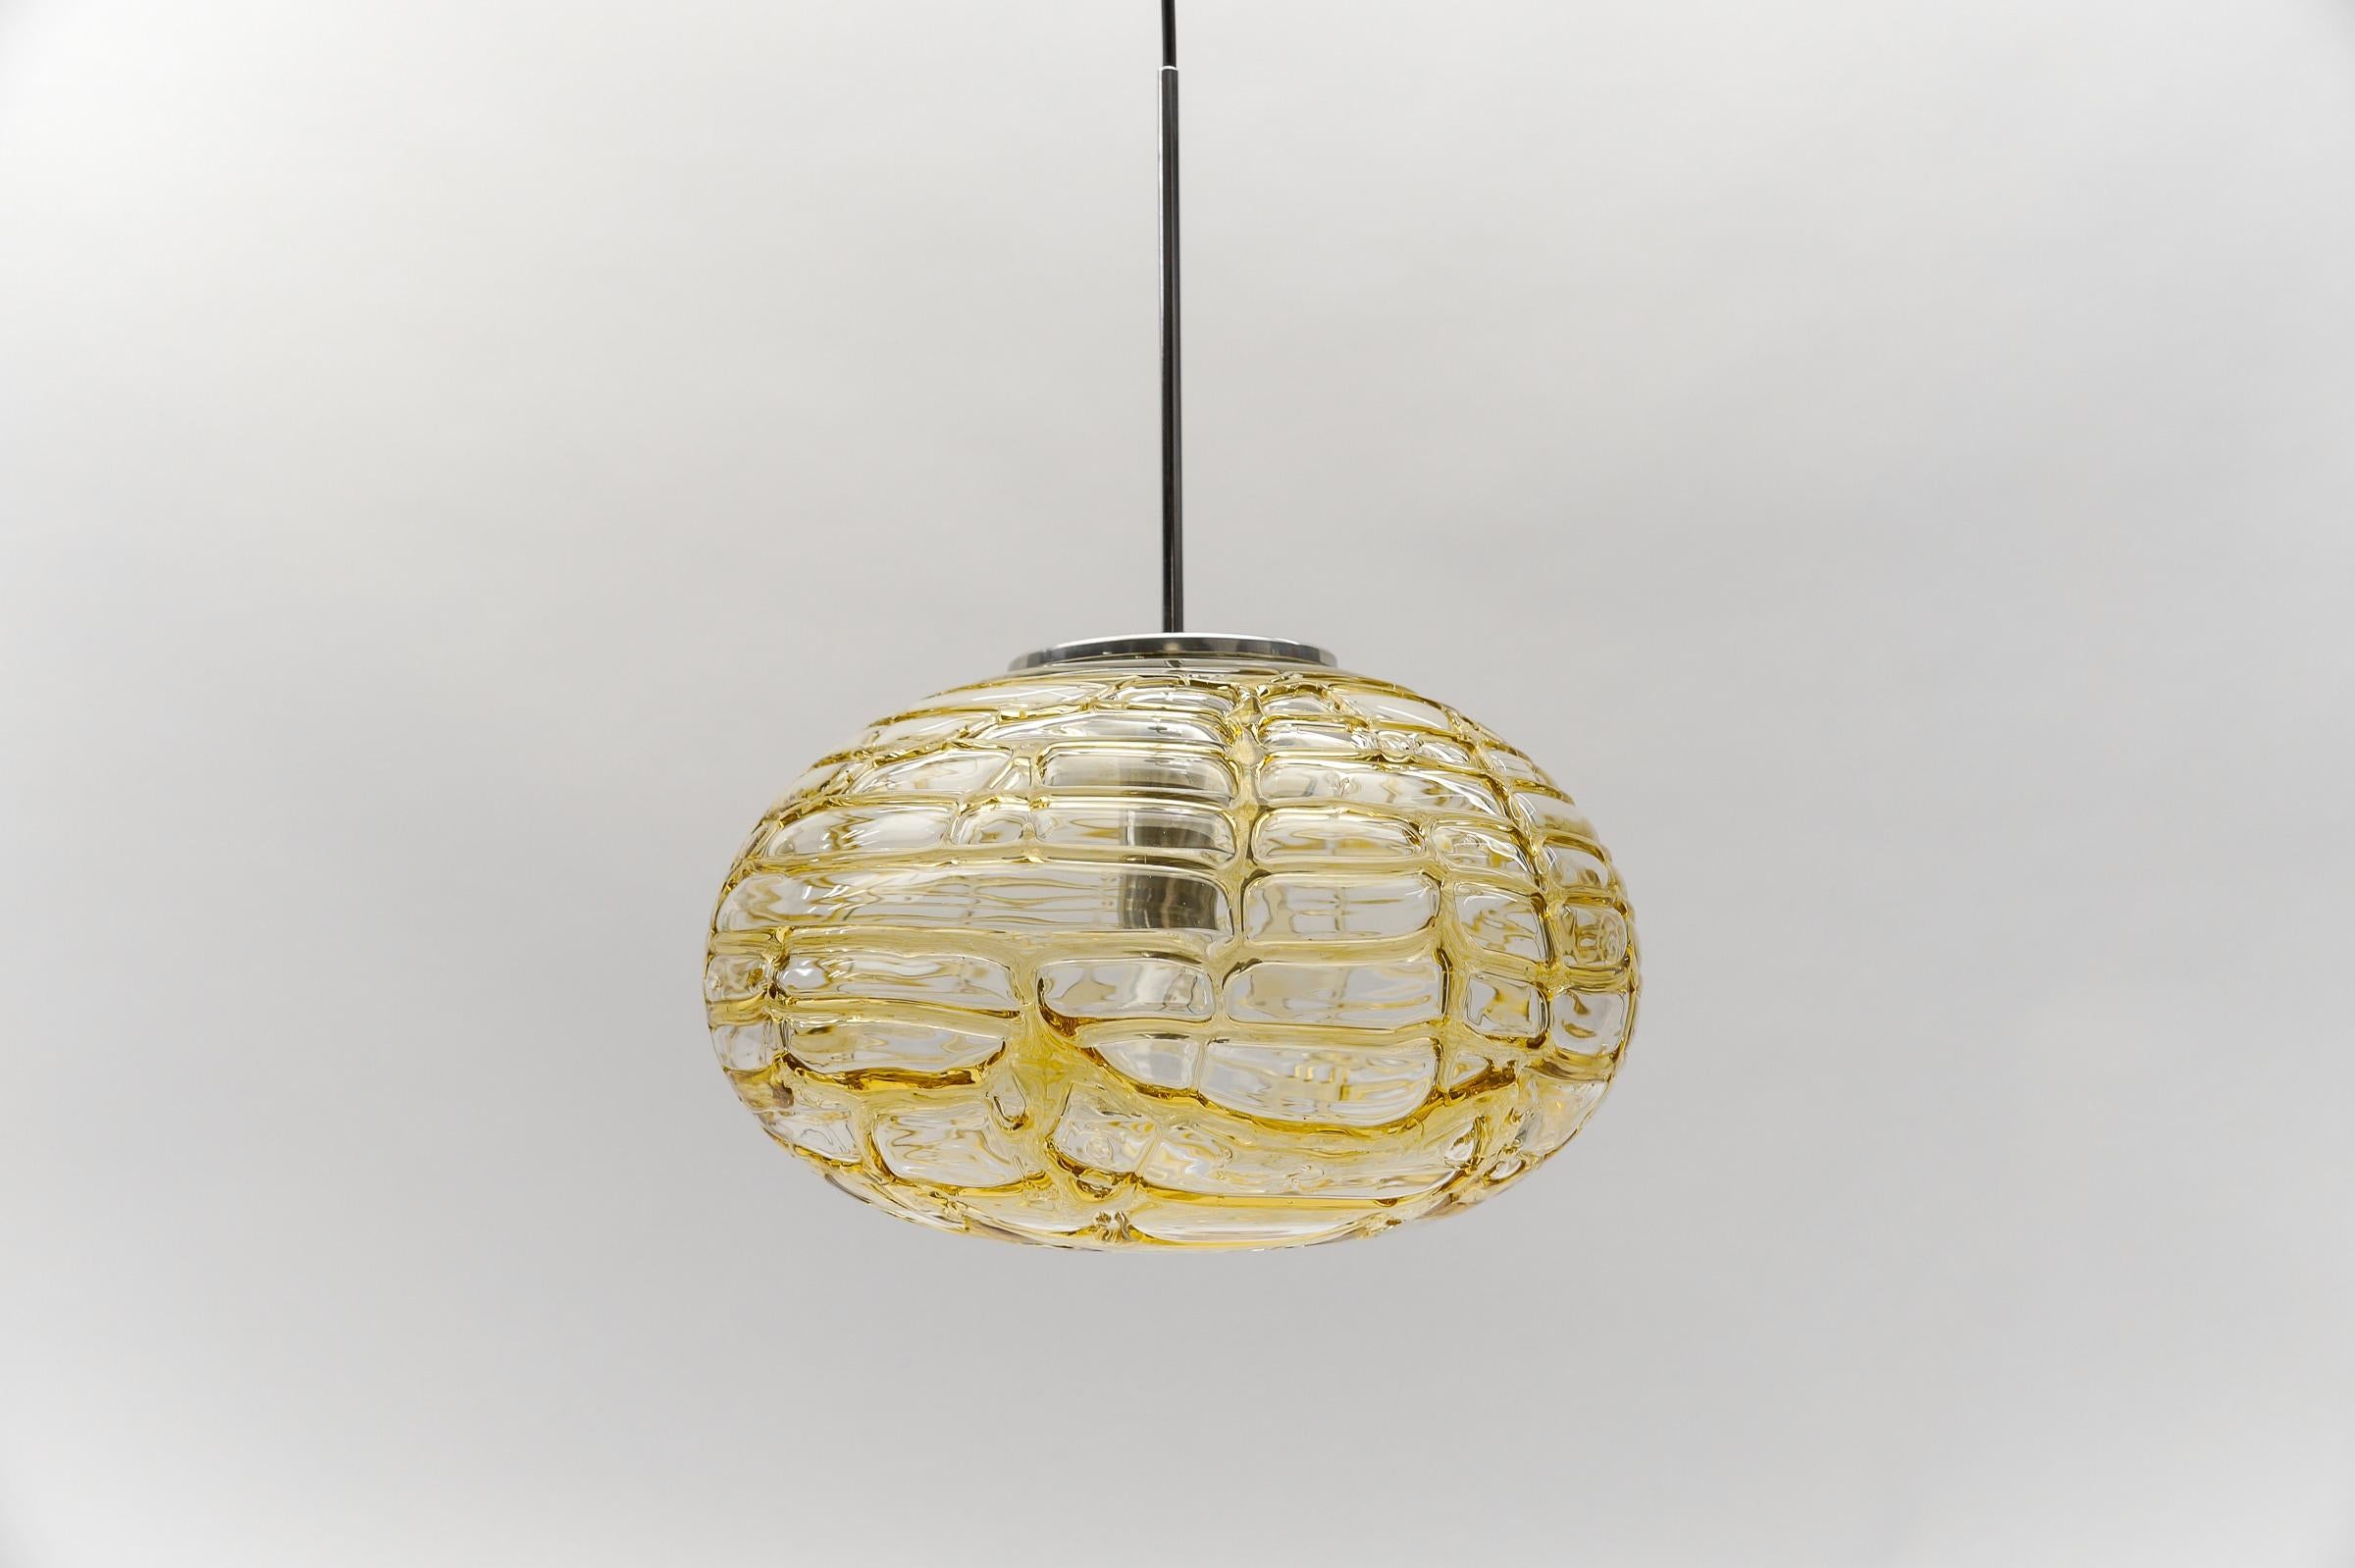 Yellow Oval Murano Glass Ball Pendant Lamp by Doria, 1960s Germany   In Good Condition For Sale In Nürnberg, Bayern